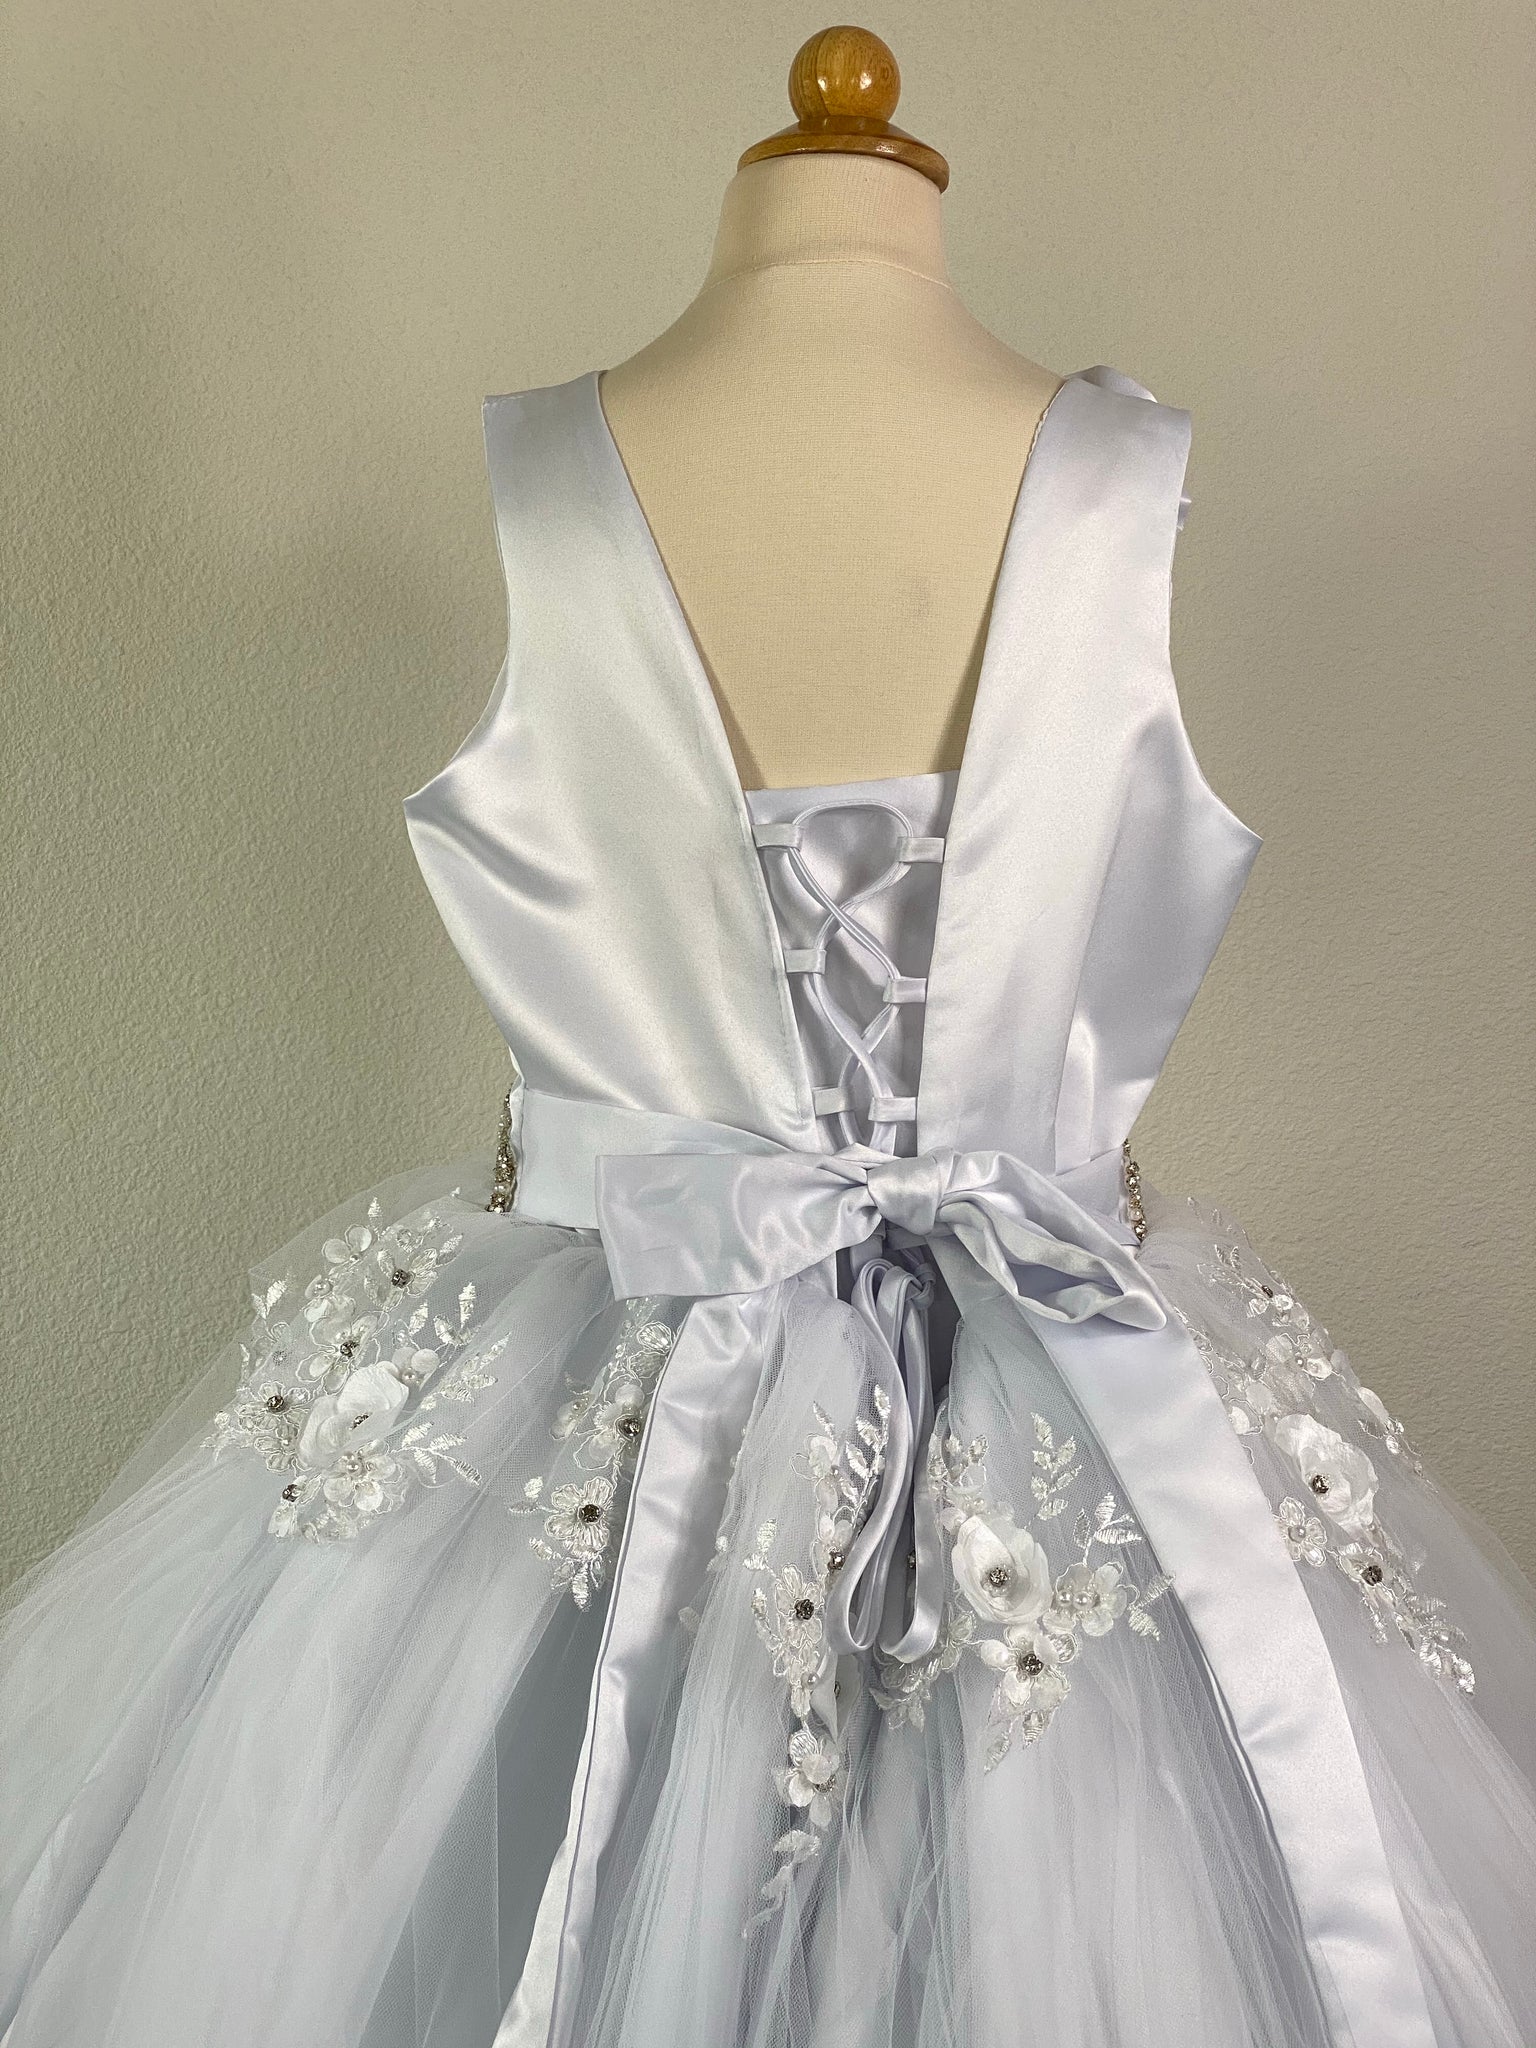 White, size 10 Satin bodice with flower on shoulder and embroidered lace detailing Pearl and rhinestone belt Layered tulle skirt with embroidered flowers with rhinestones on top layer Corset closure Satin ribbon for belt